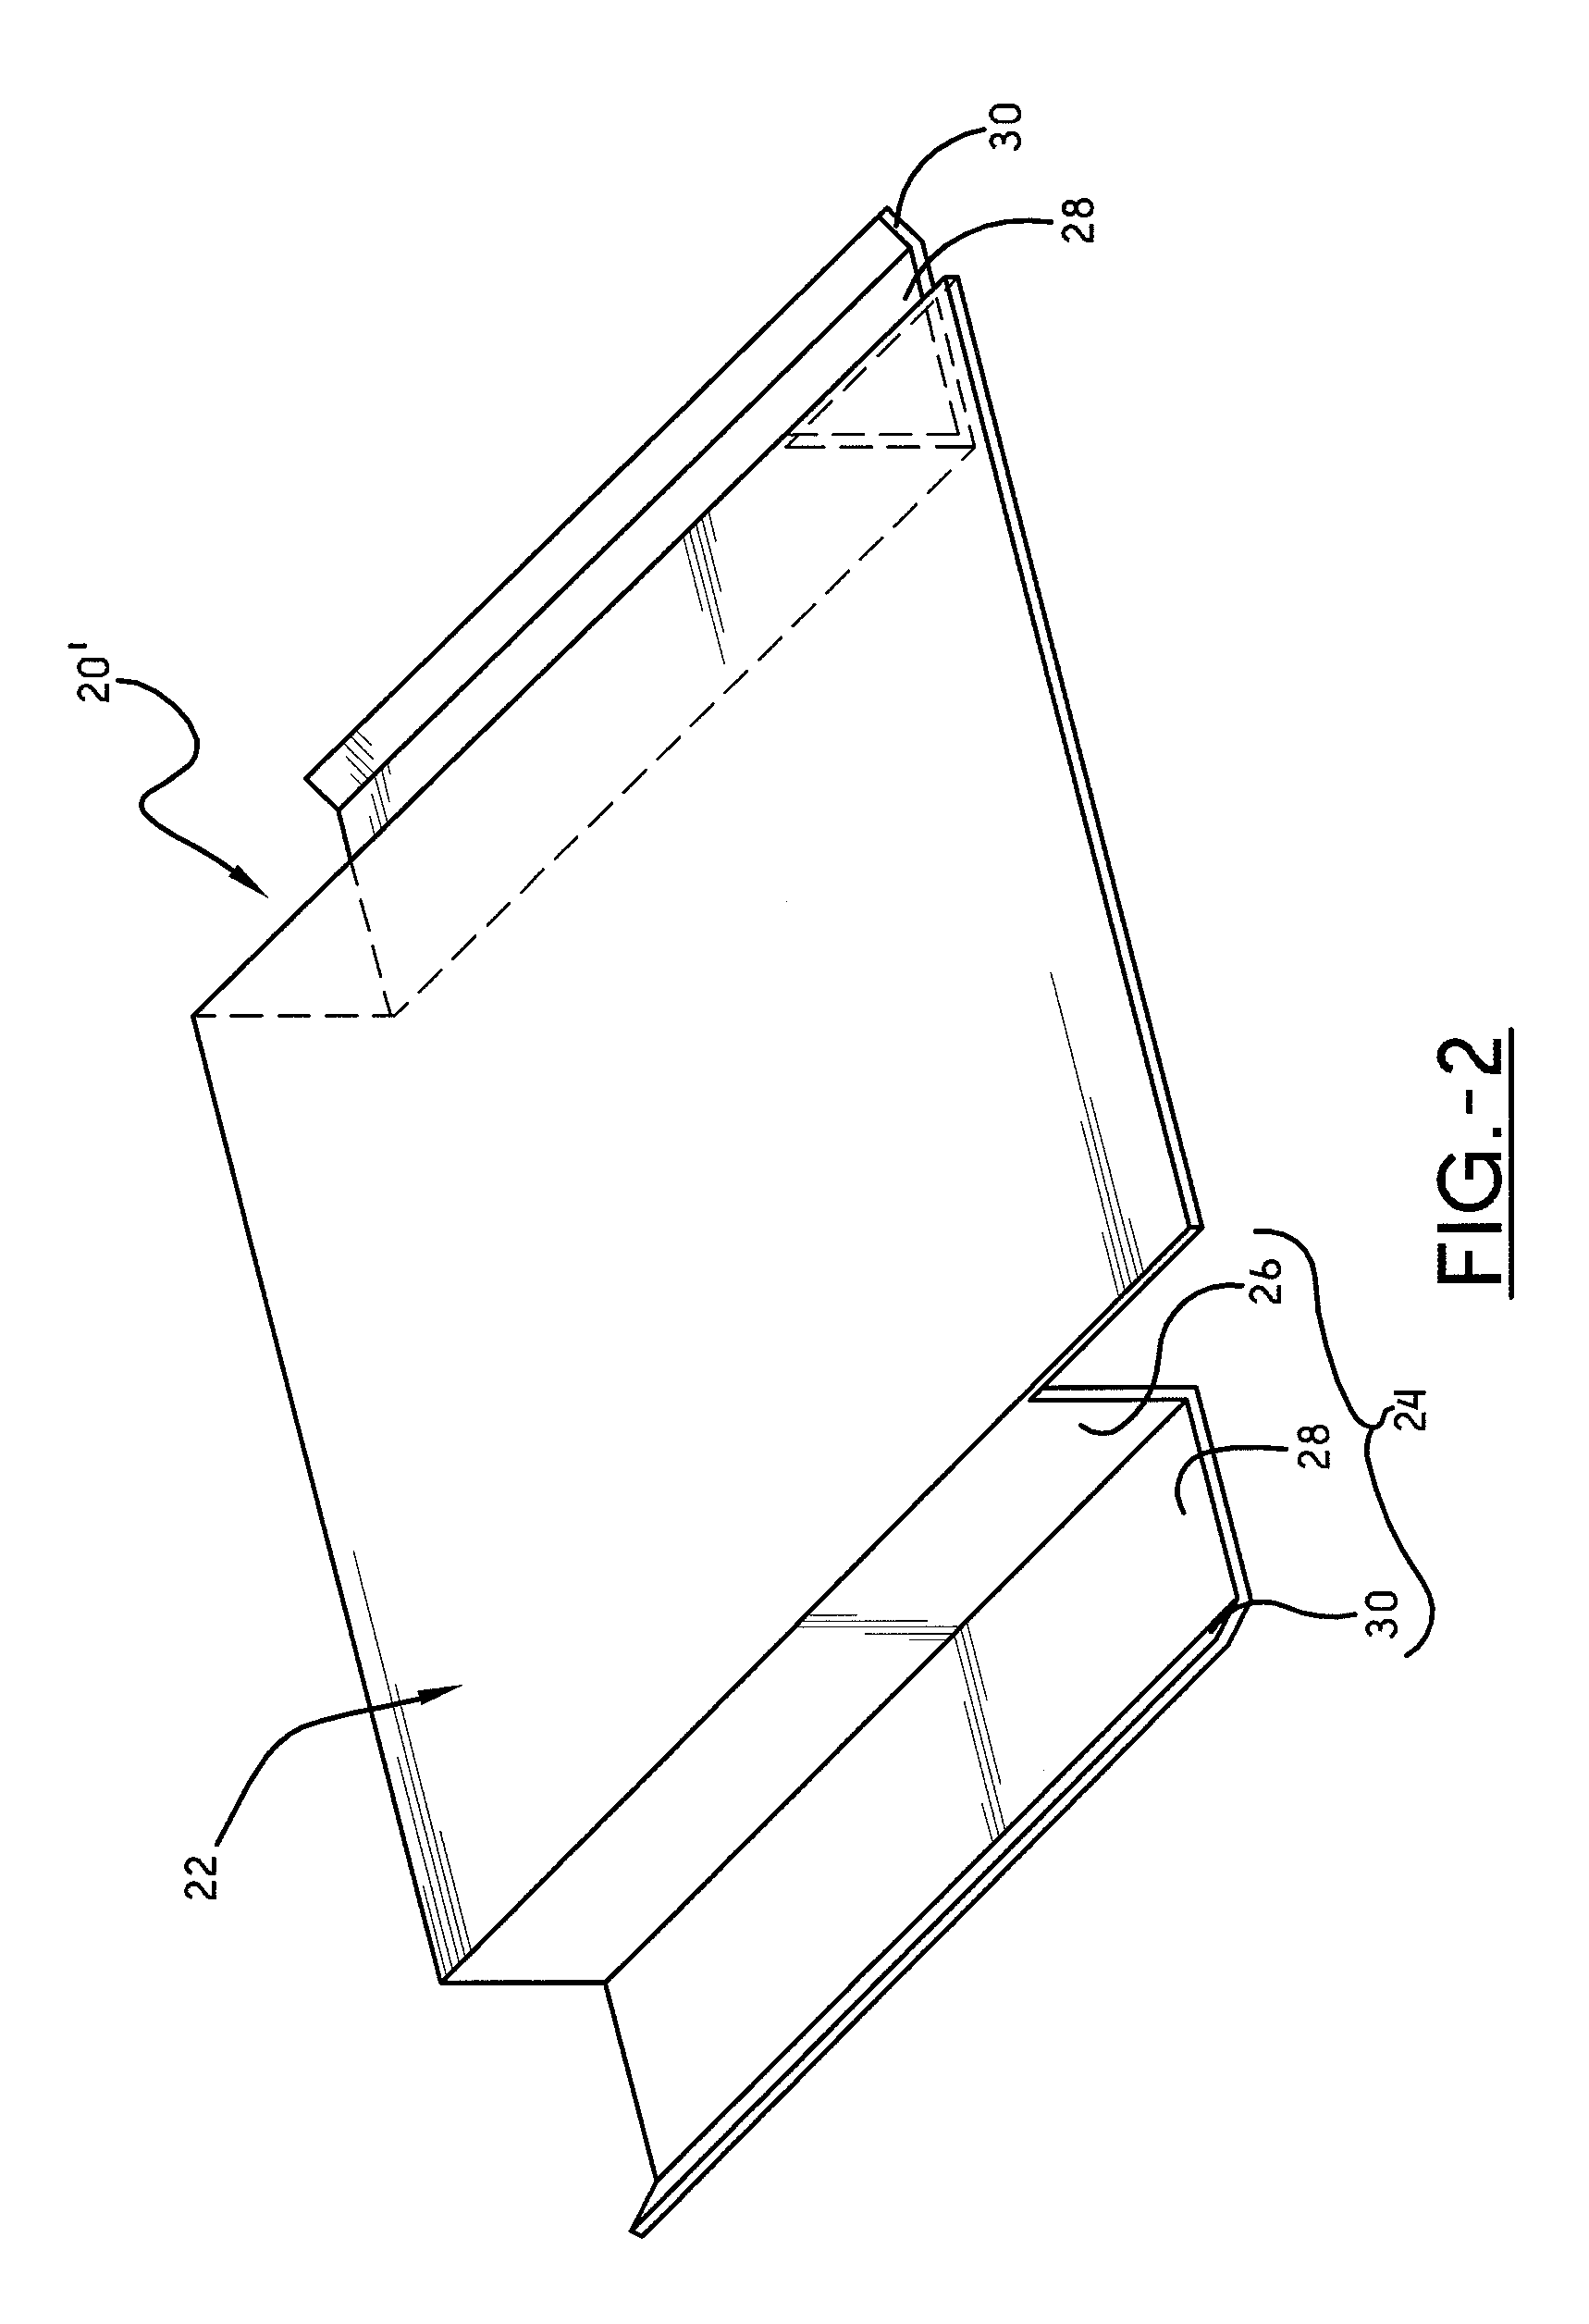 Arm board adapter for surgical table